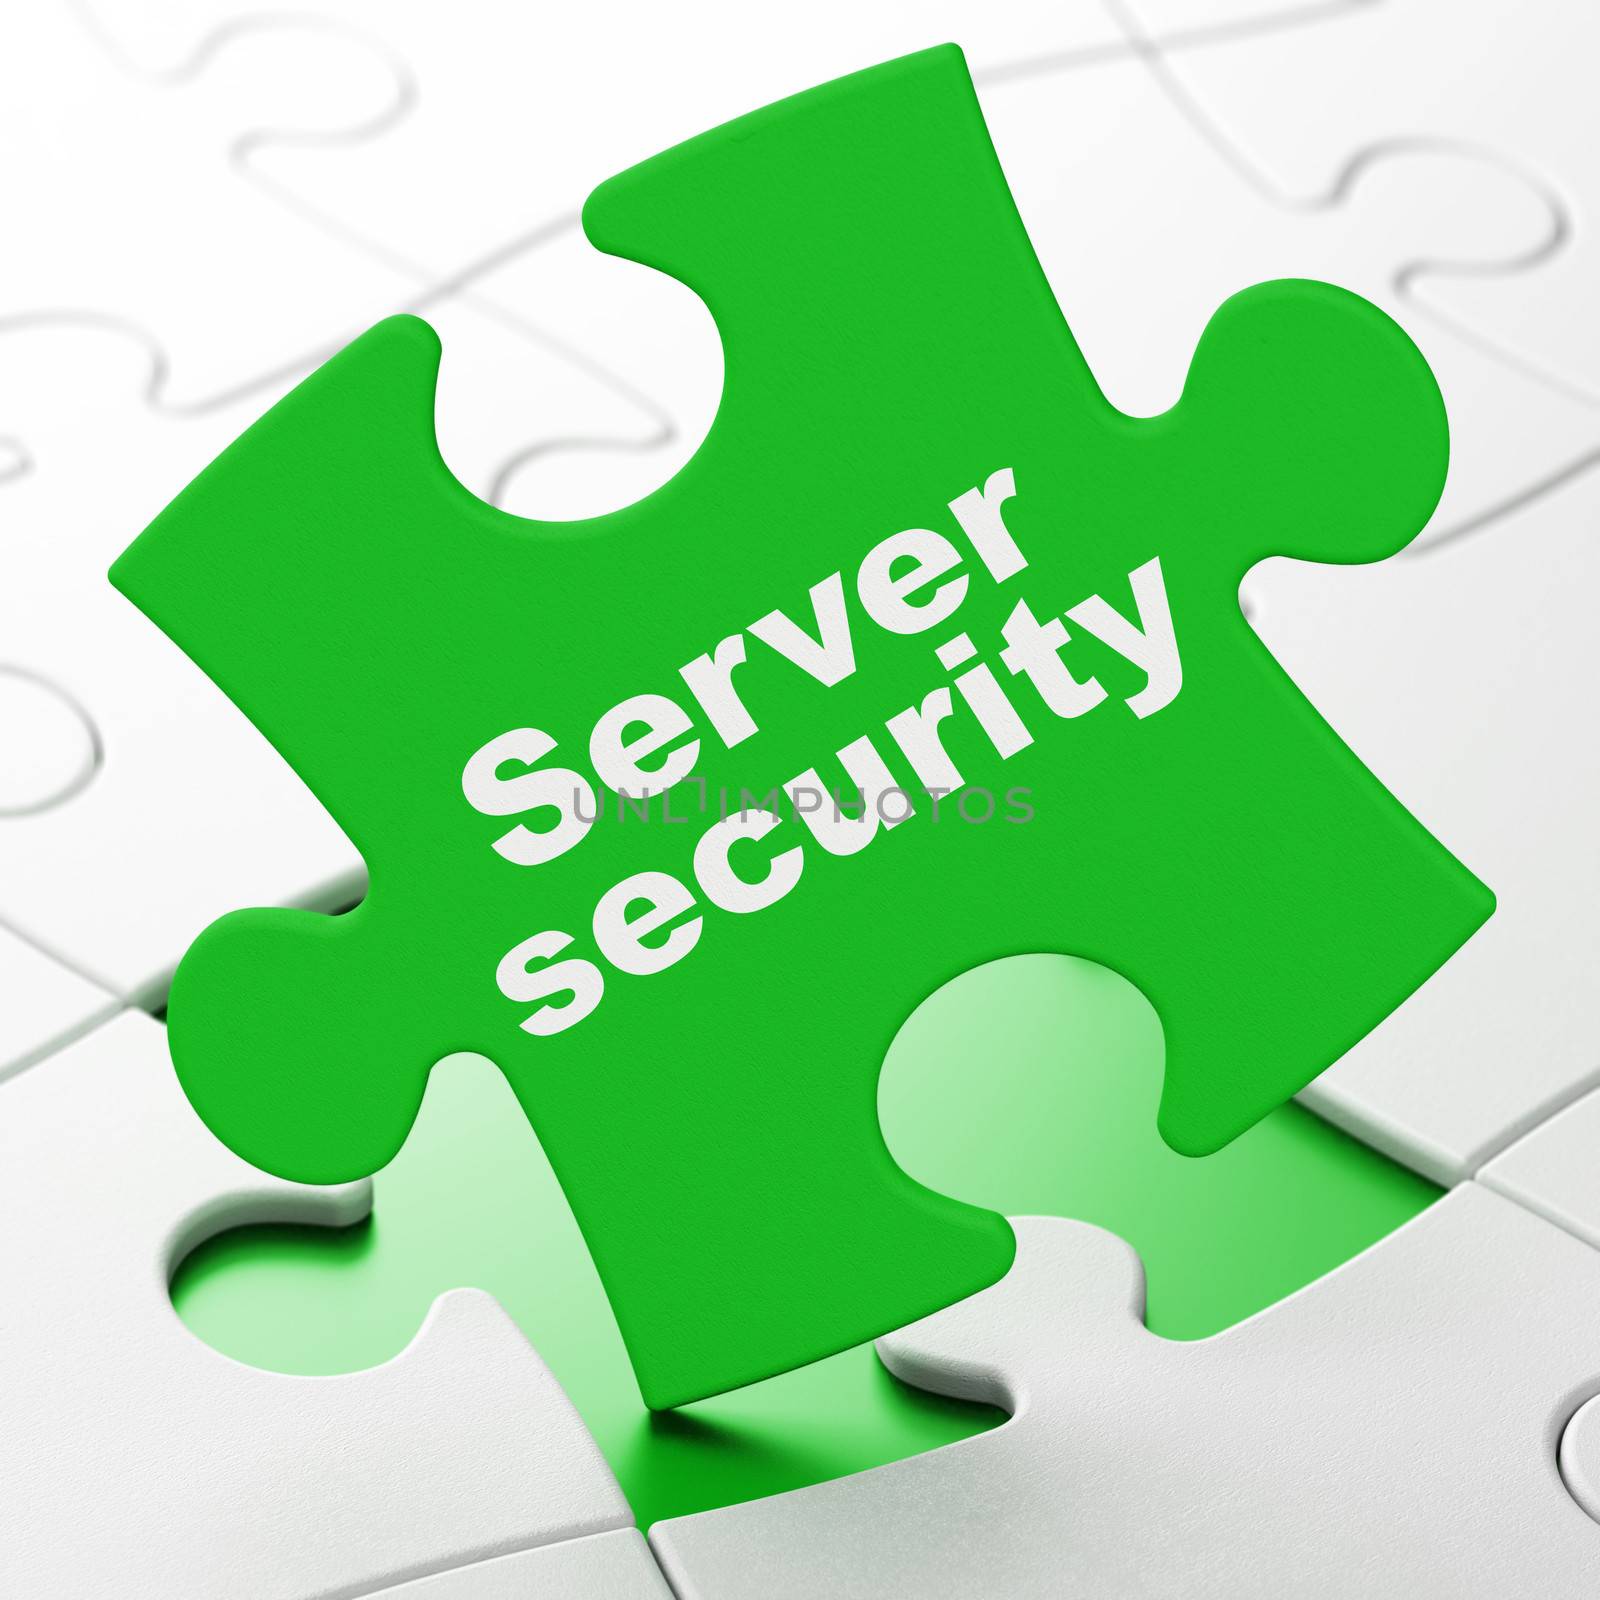 Security concept: Server Security on puzzle background by maxkabakov